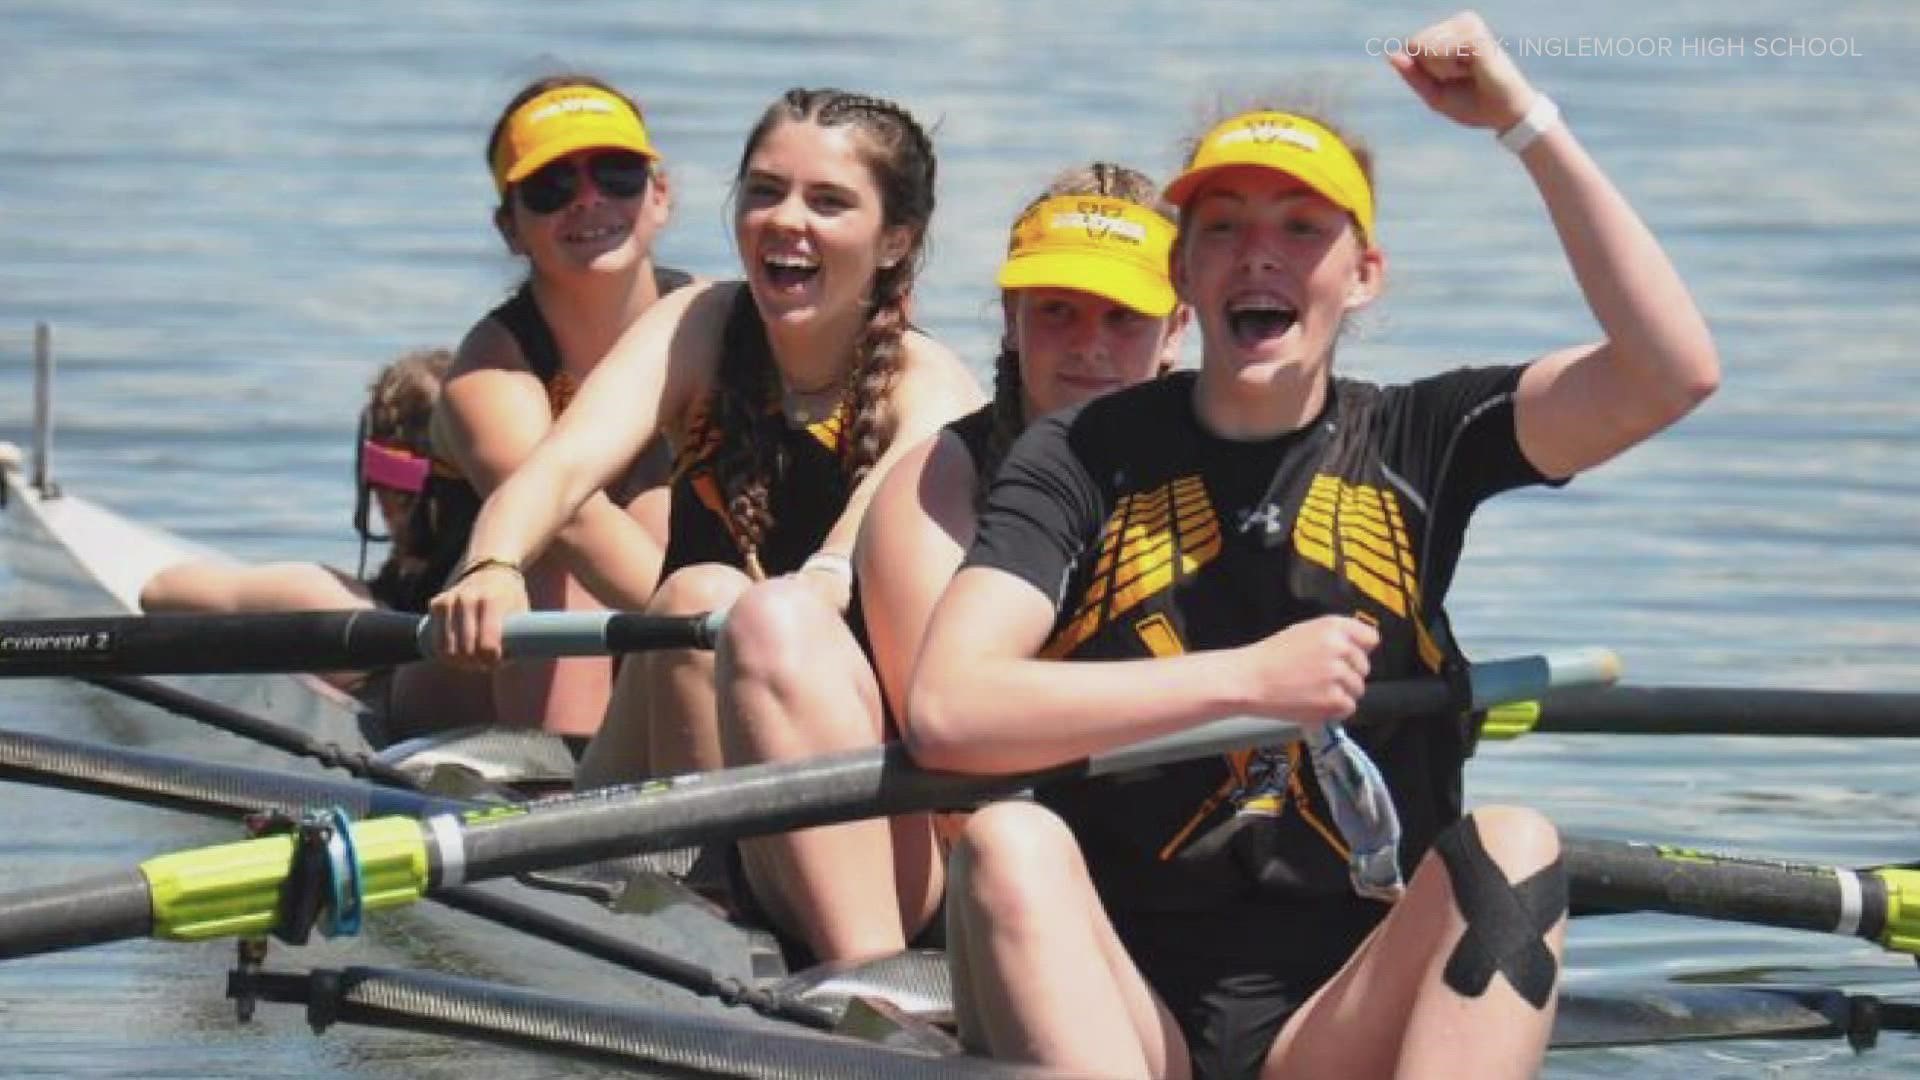 The U17 girls four with coxswain team from Inglemoor High School will compete at the U.S. Rowing Youth National Championships in Sarasota, Florida.